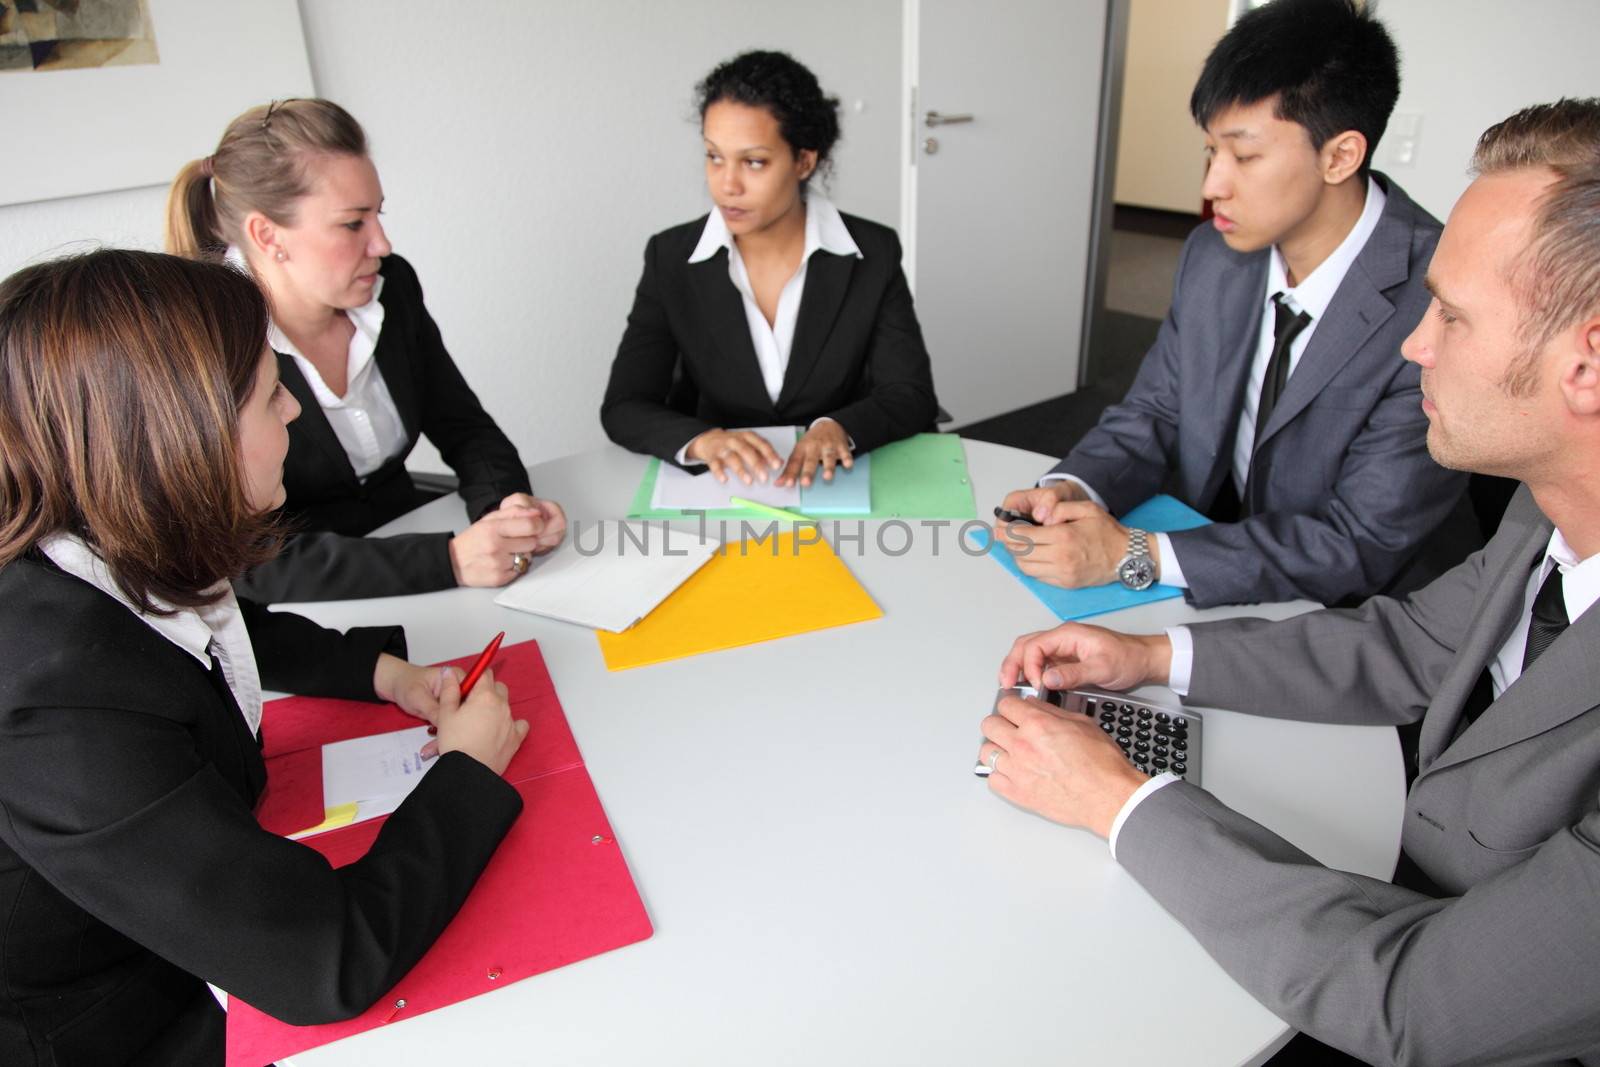 Group of serious young multiethnic business people in a meeting seated around a table discussing a problem